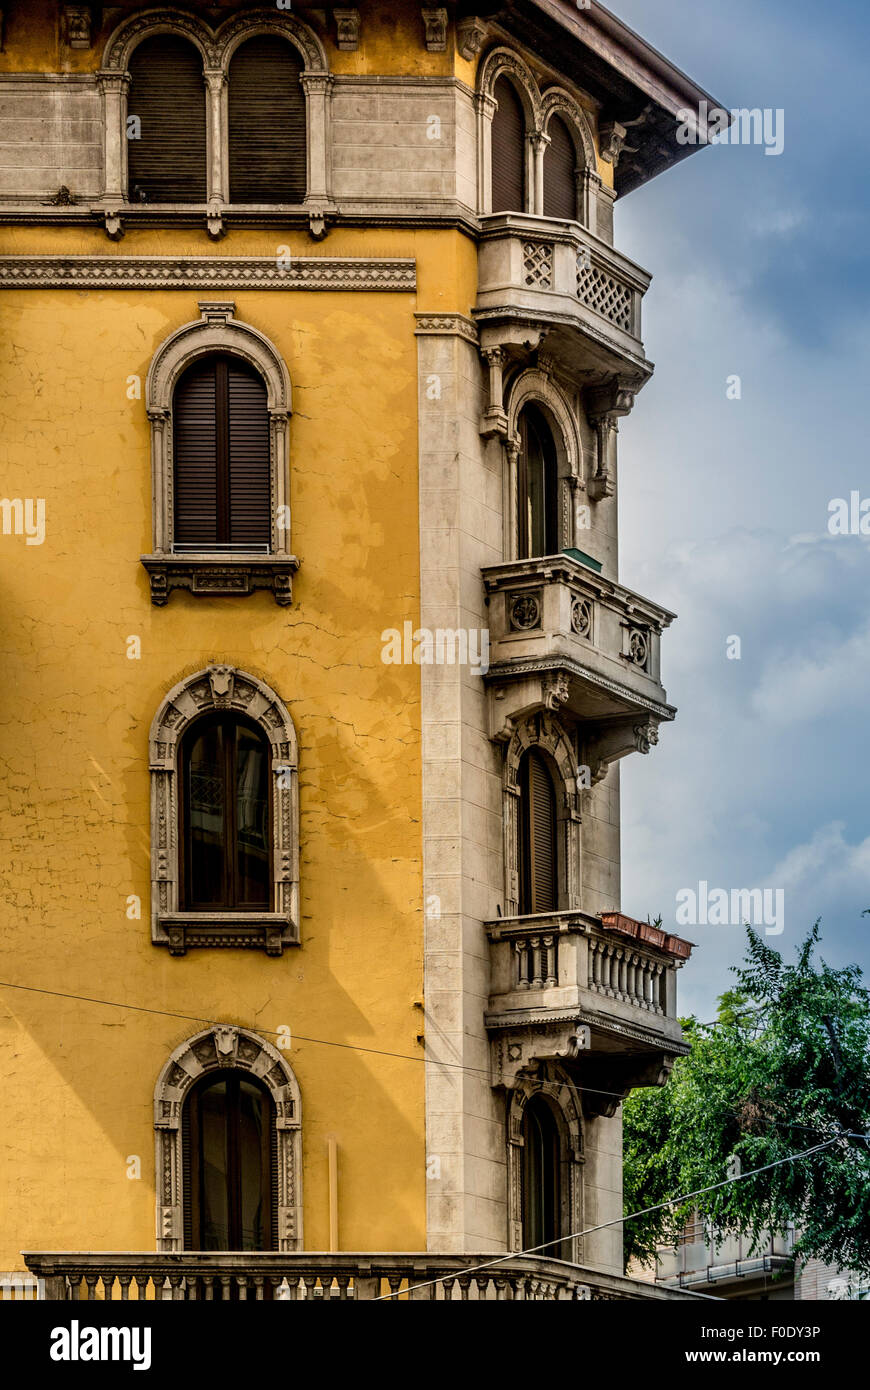 Yellow rendered building with arched windows. Stock Photo